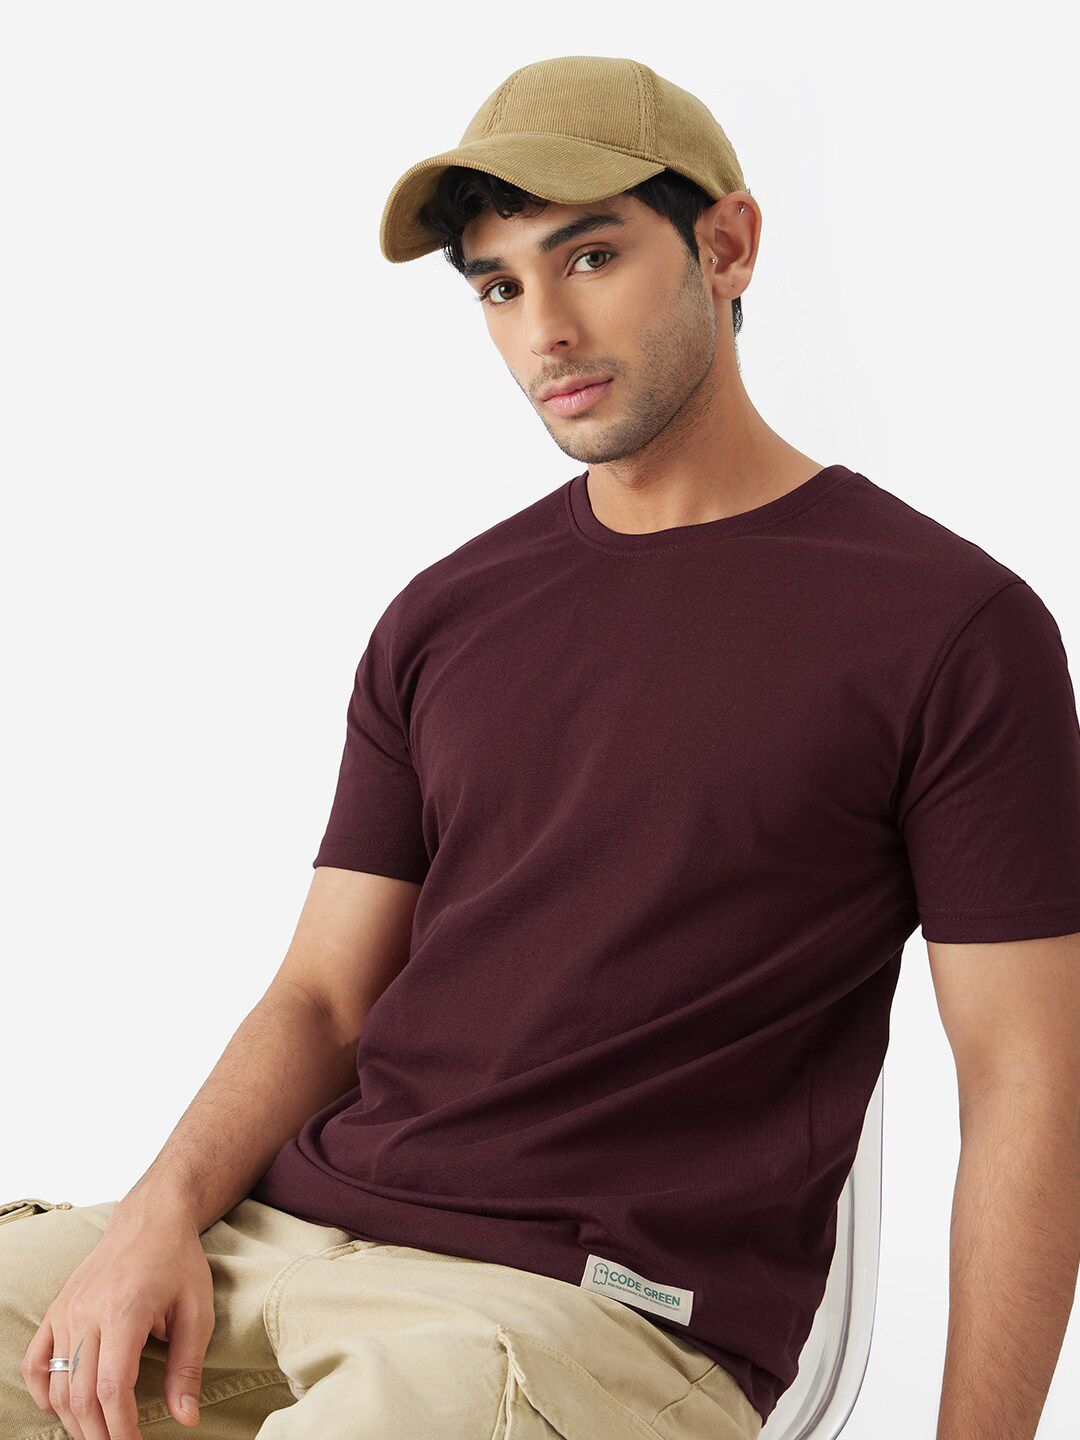 The Souled Store Round Neck Short Sleeves Cotton T-shirt